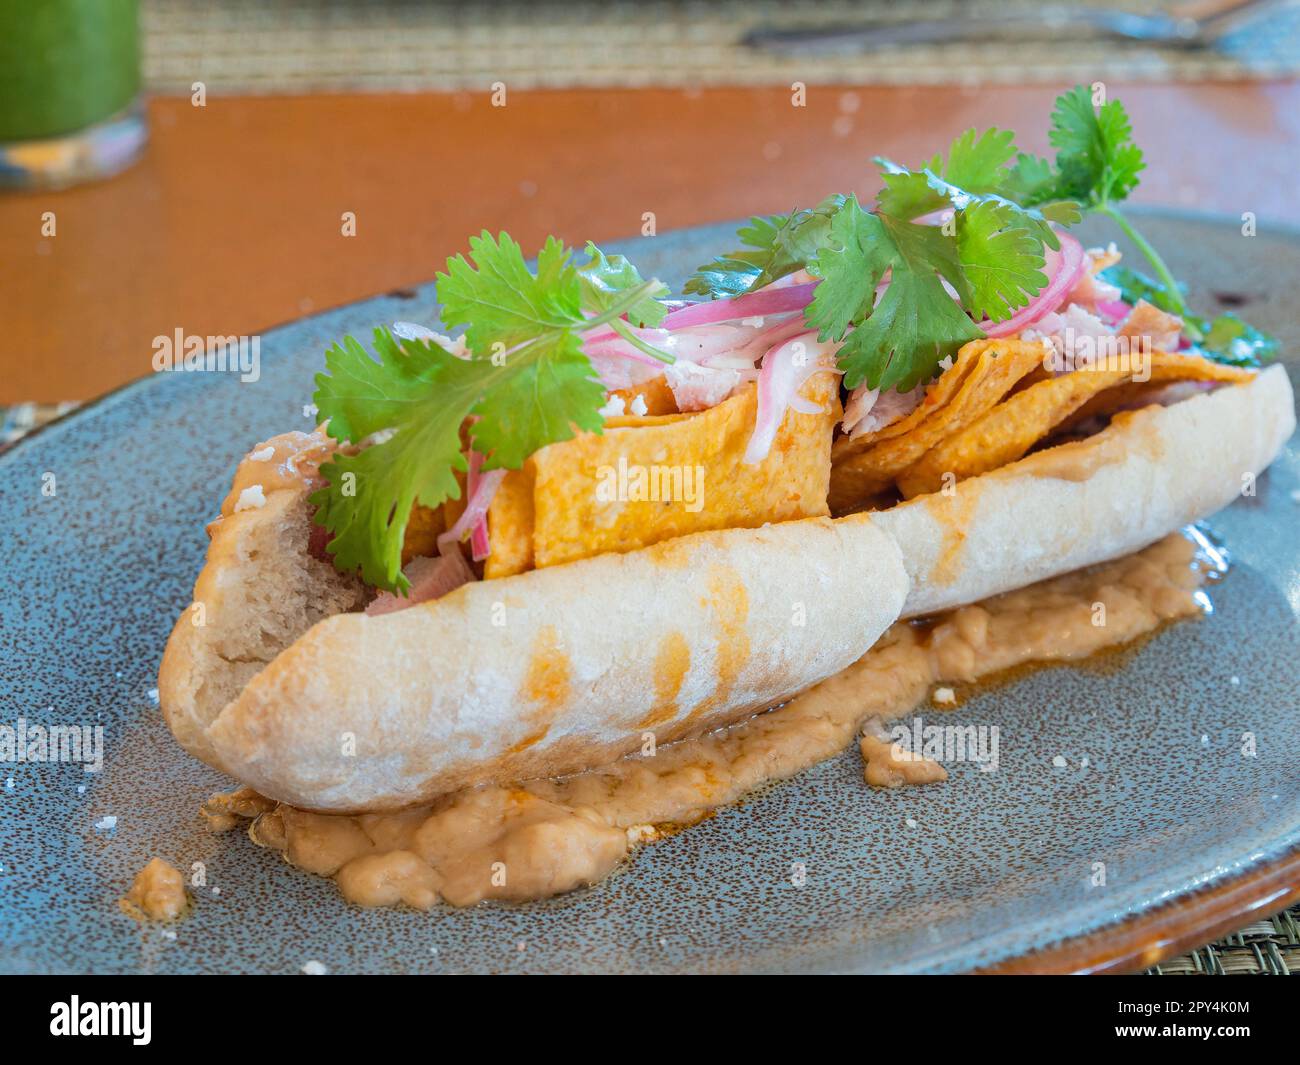 Close up shot of Mexician style sandiwch at Tequila, Mexico Stock Photo